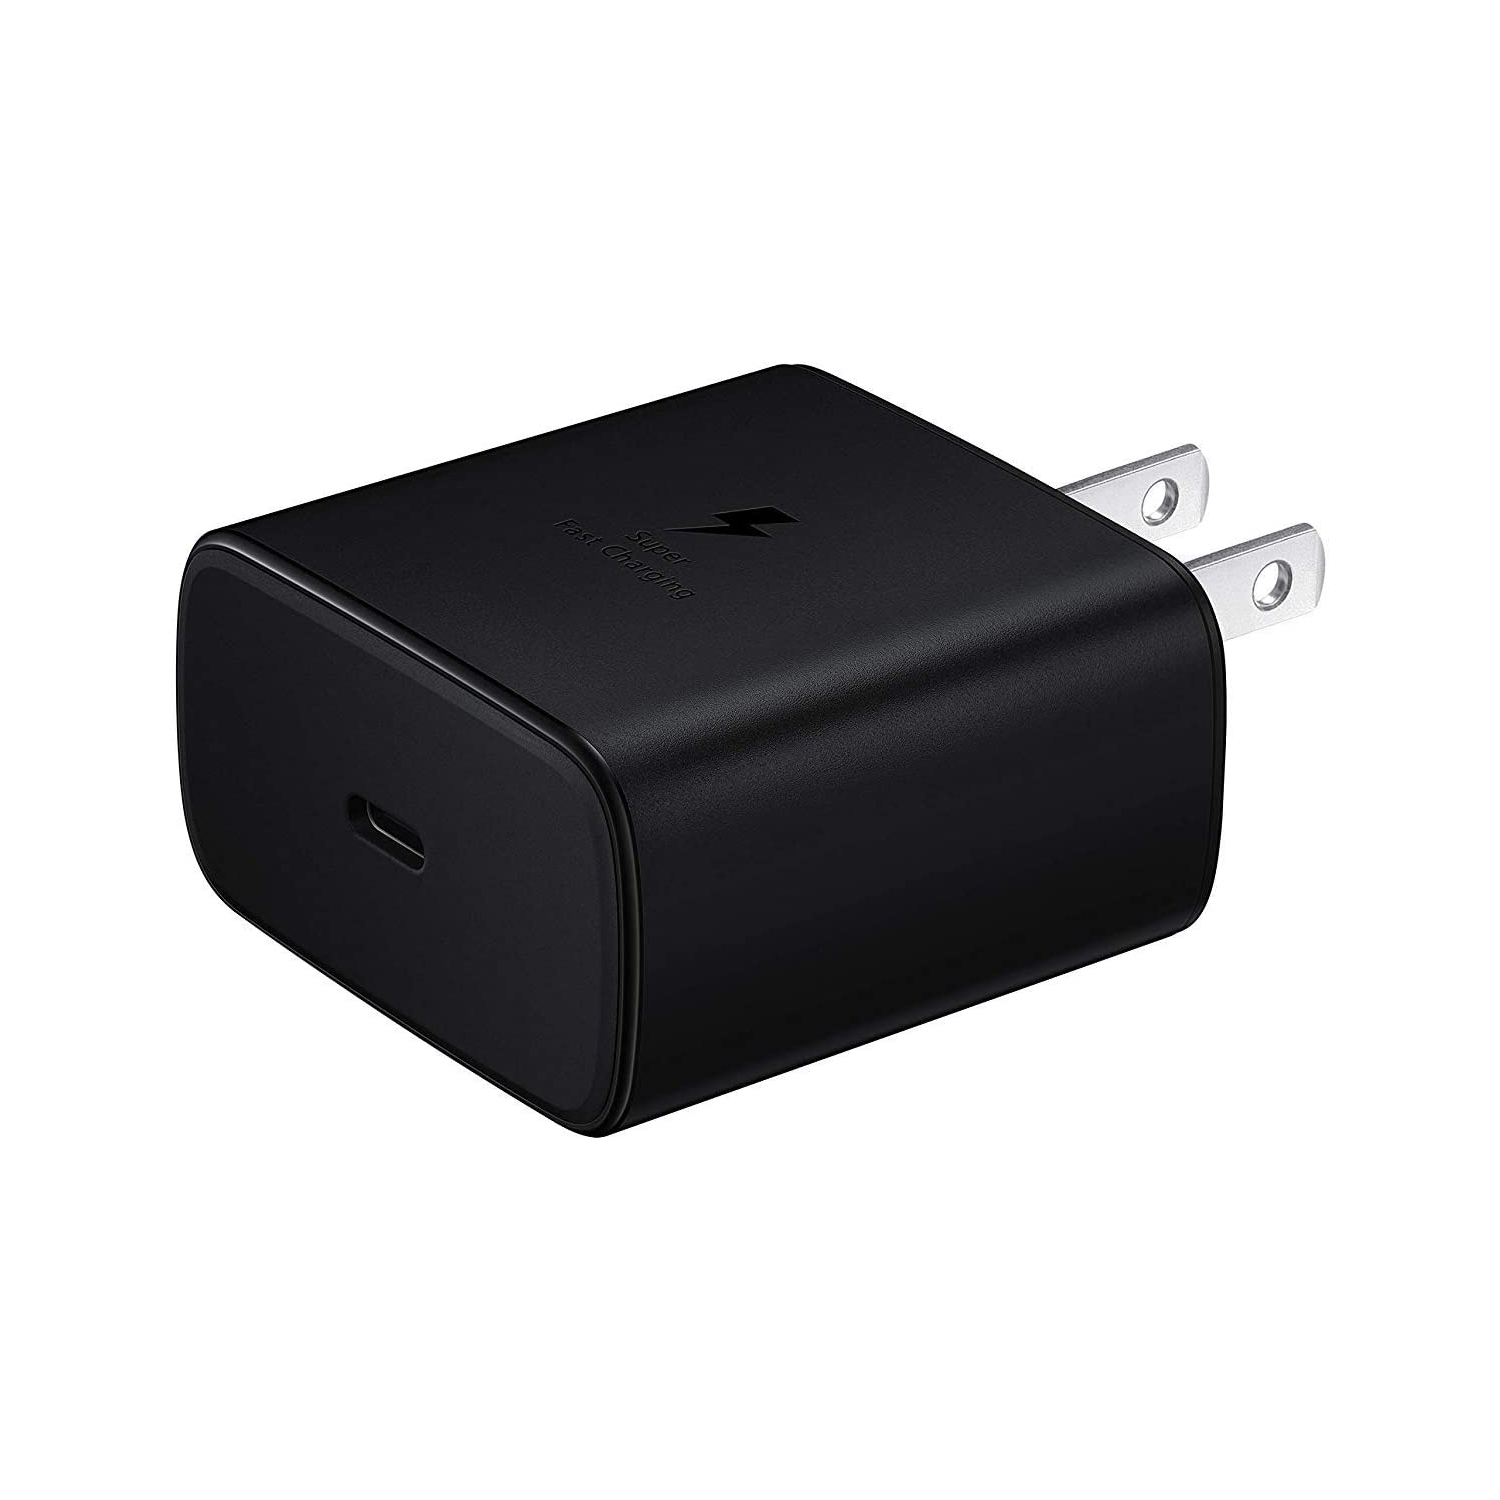 45W USB-C PD PPS Super Fast Charging Wall Charger Adapter for Samsung Galaxy S10 S20 Note 10 20 Ultra Google Moto LG, Black